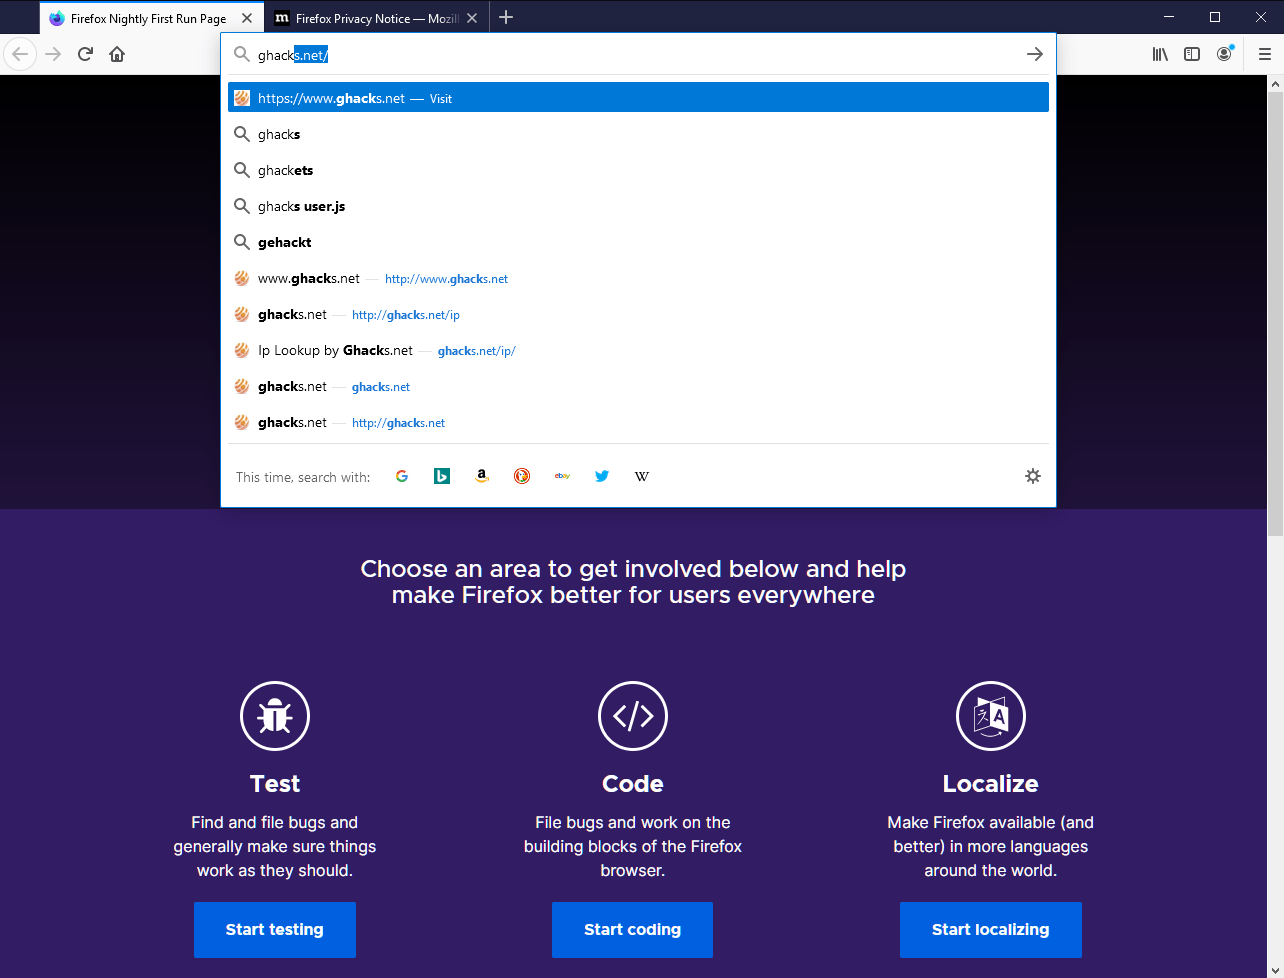 Firefox 75 drops HTTPS and WWW from address bar results